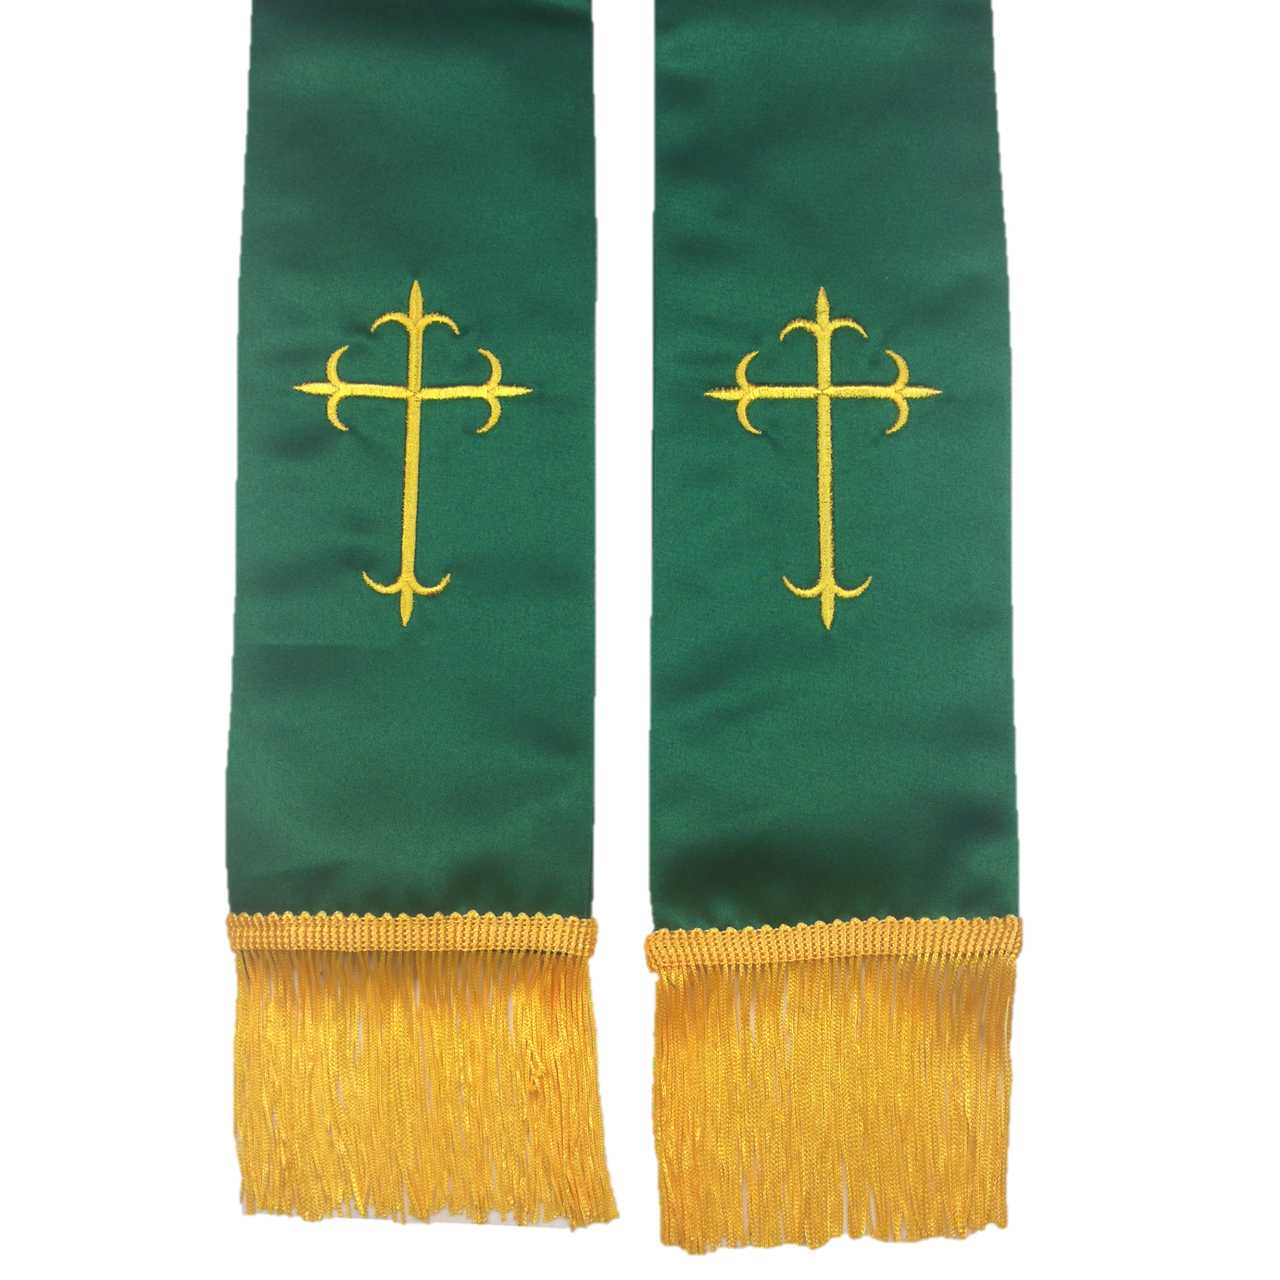 Premium Clergy Stole - Emerald Green Satin with Gold Latin Crosses